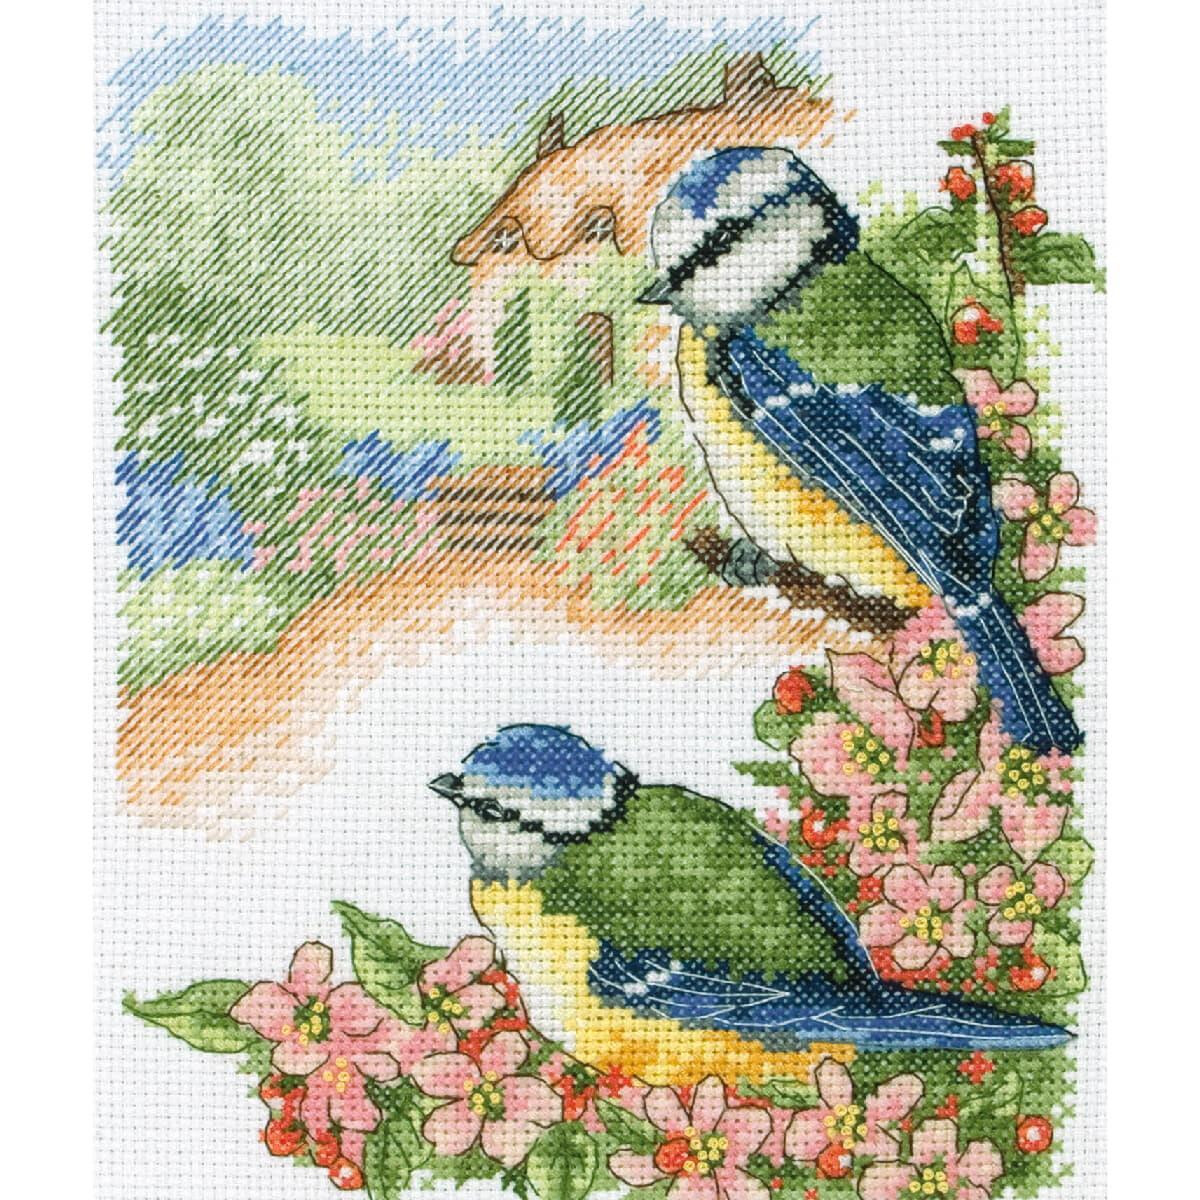 Anchor counted cross stitch kit "Summer...